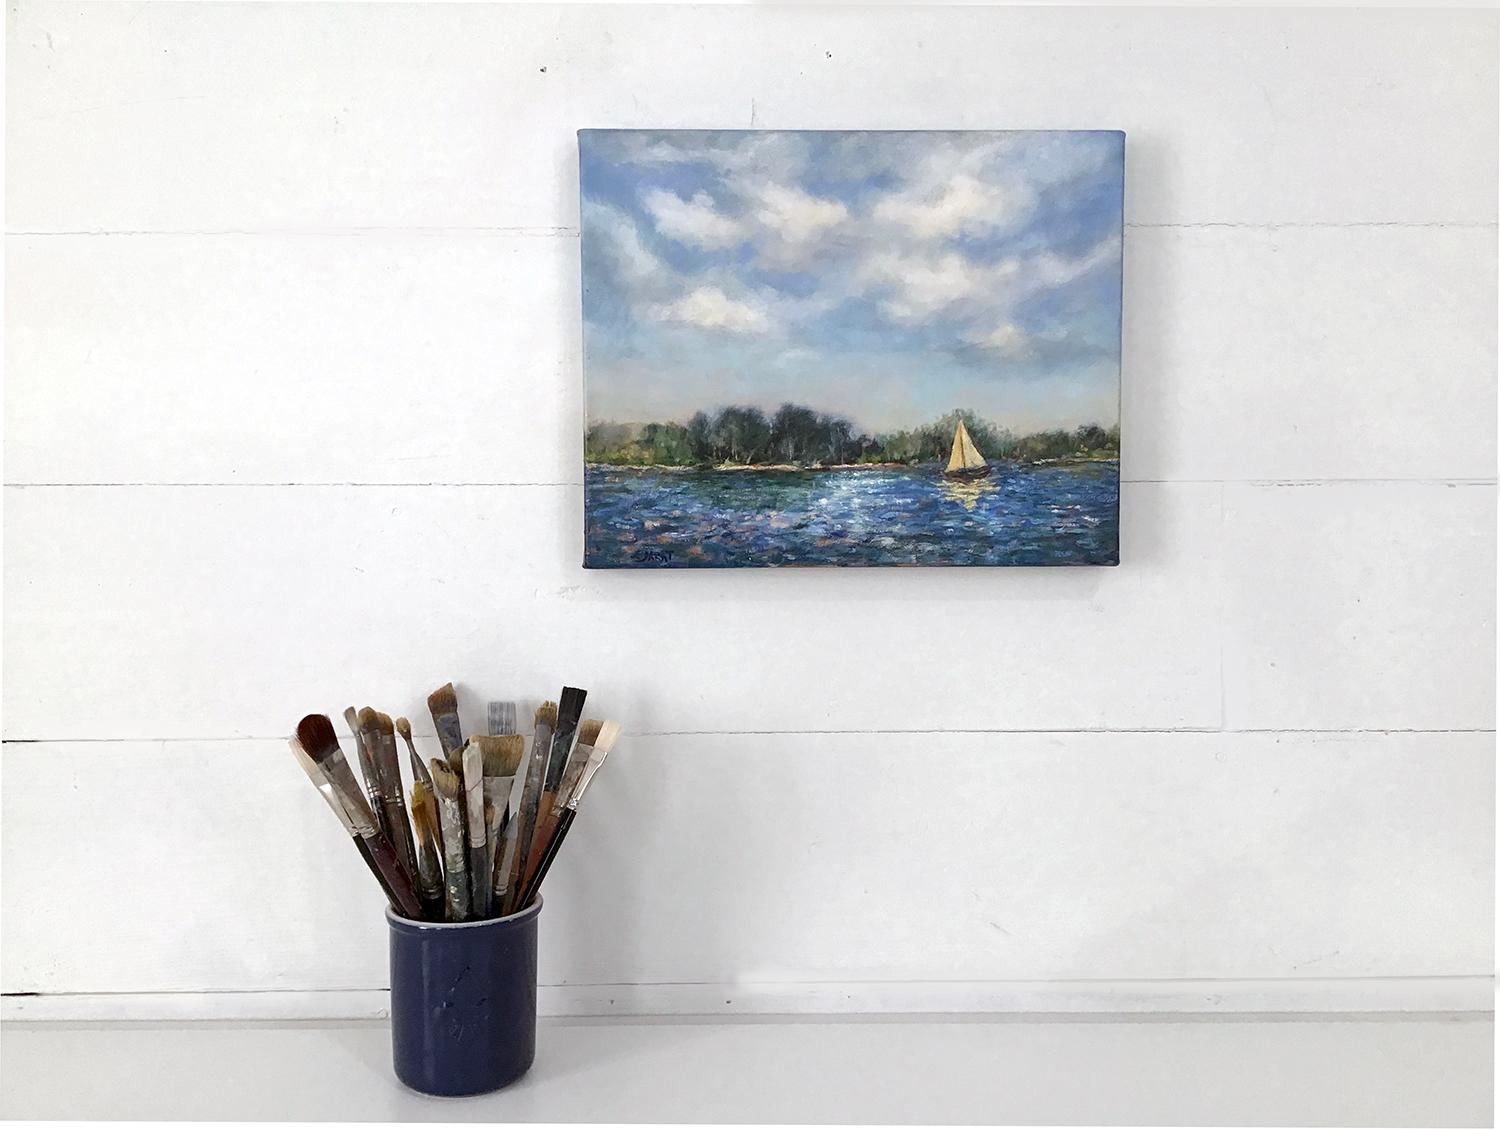 <p>Artist Comments<br>Billowing clouds float above an impressionistic lake. The yellow sail of a lone boat reflects on the choppy water, capturing the interplay of light and texture. The mostly cool palette with touches of warm yellows infuses the